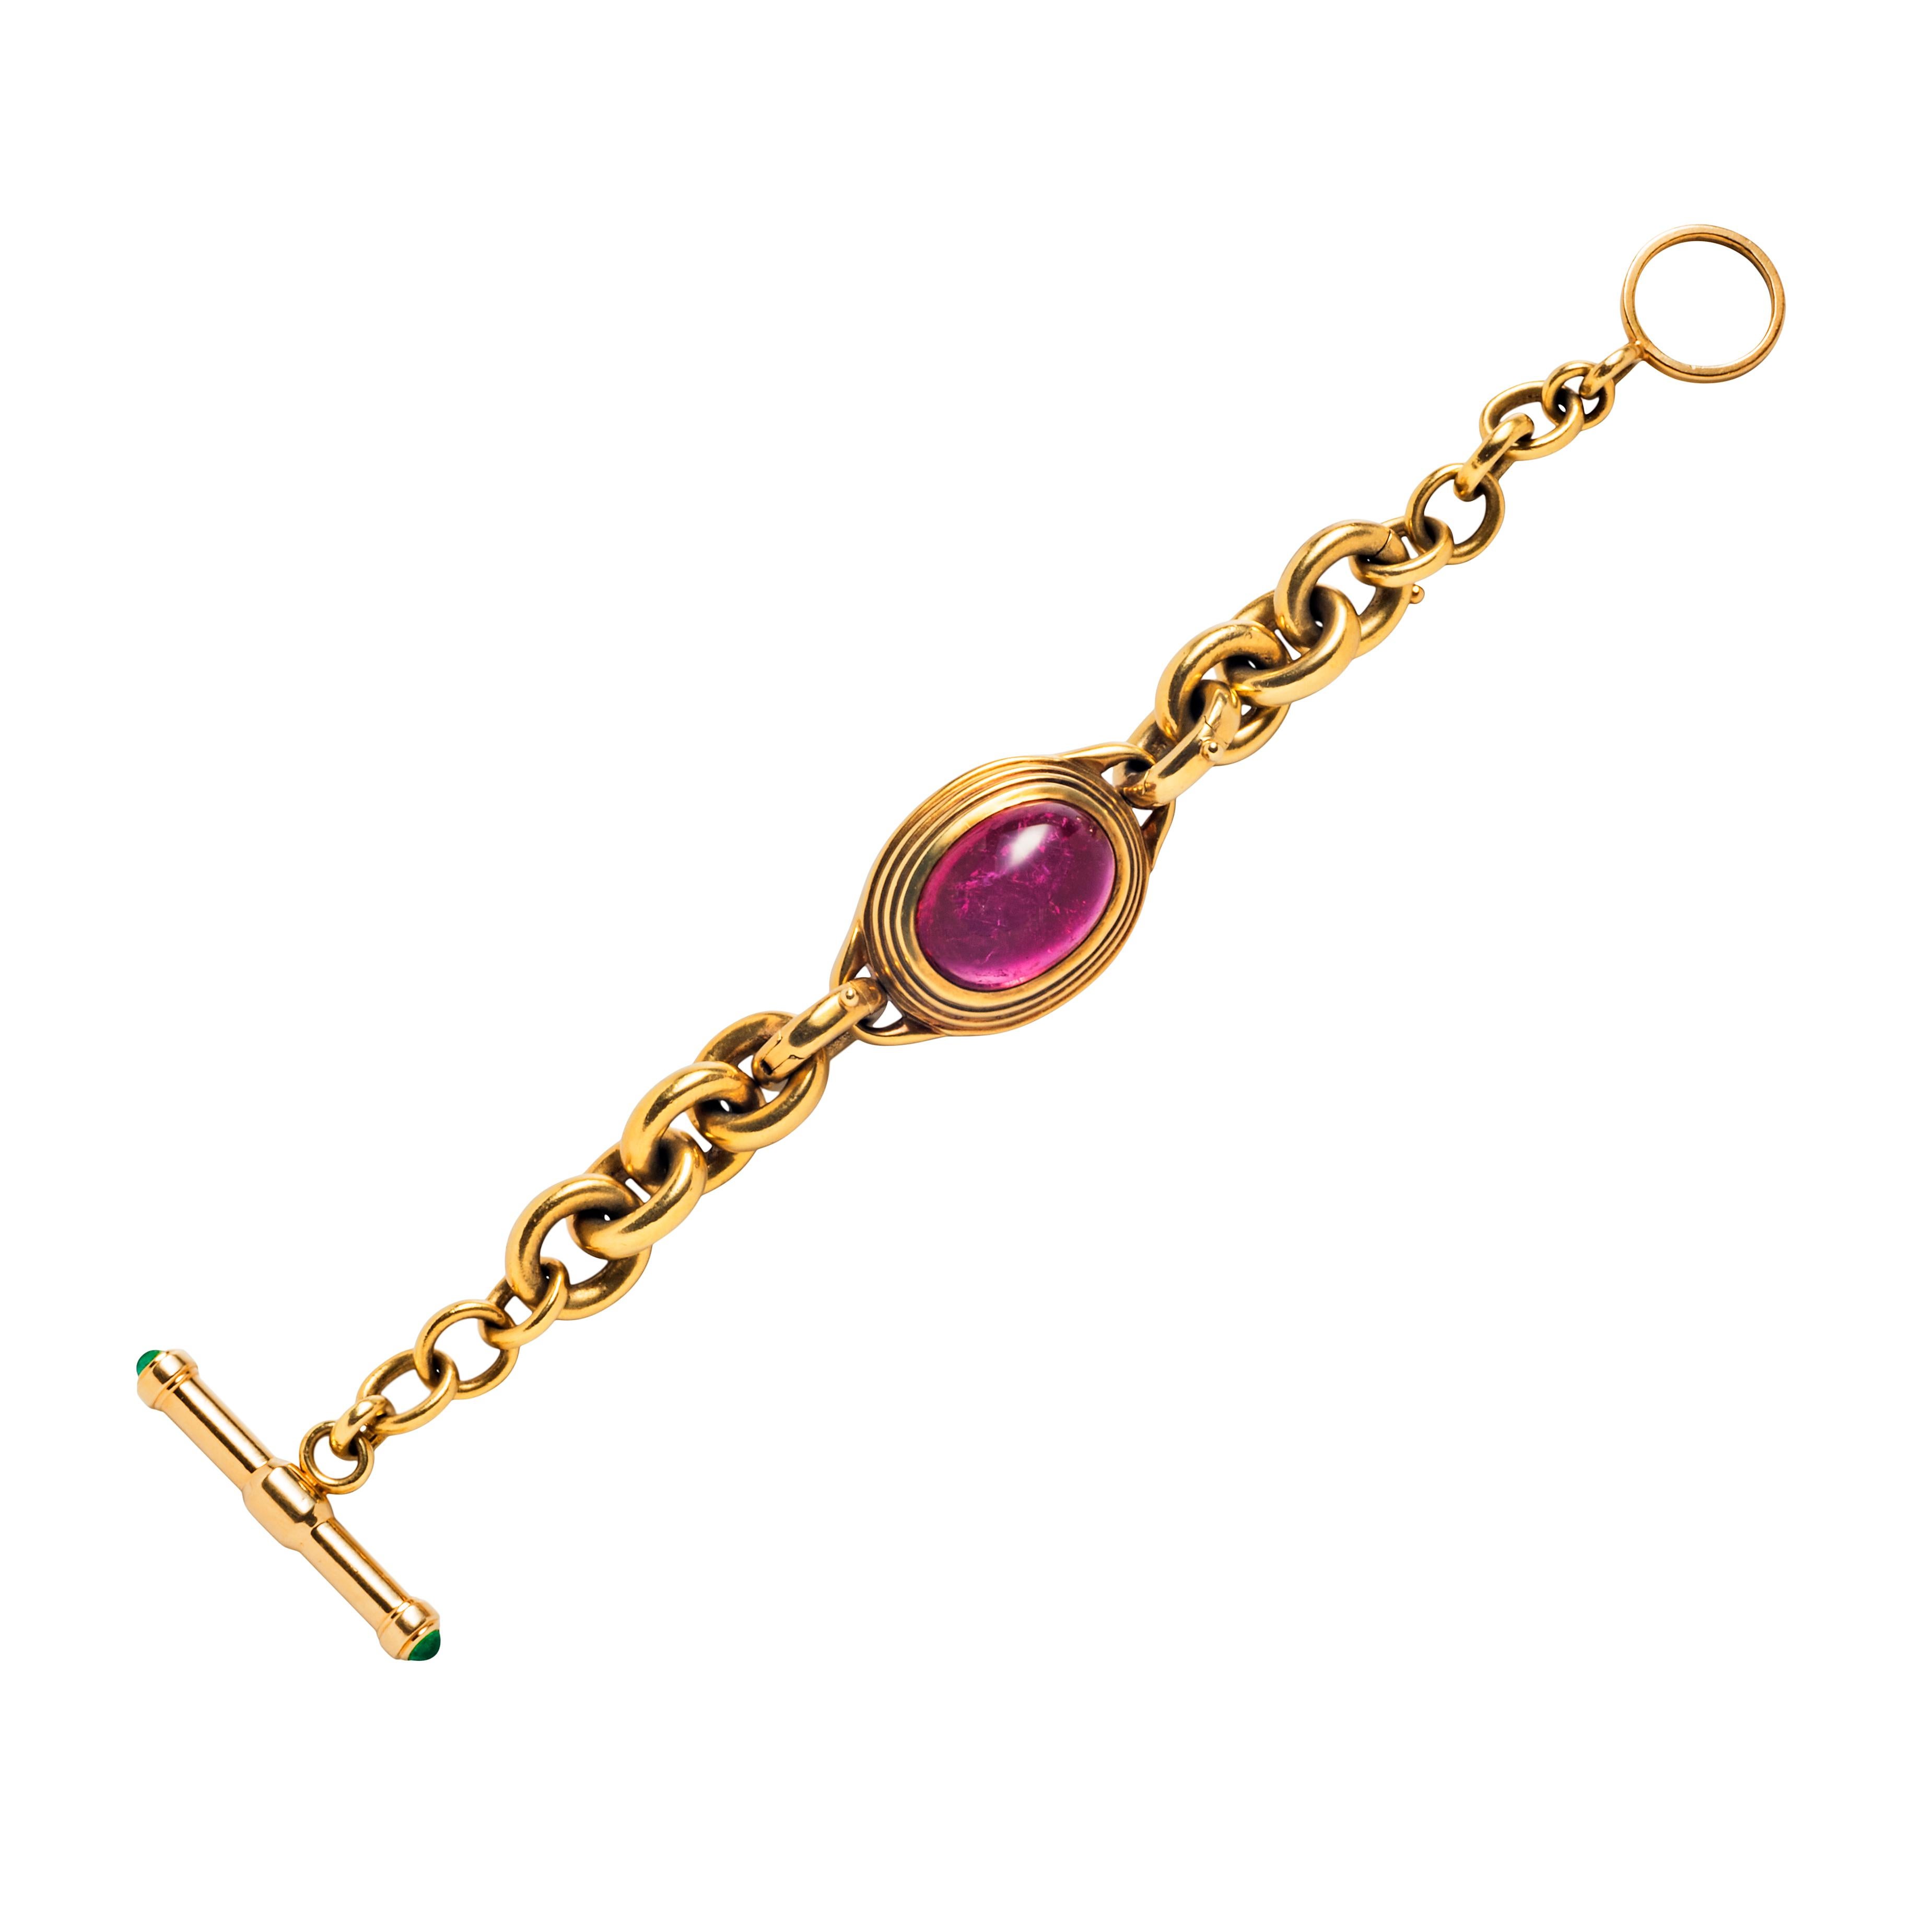 Cabochon 18k Gold Curb Link Bracelet with Interchangeable Citrine and Tourmaline Center For Sale